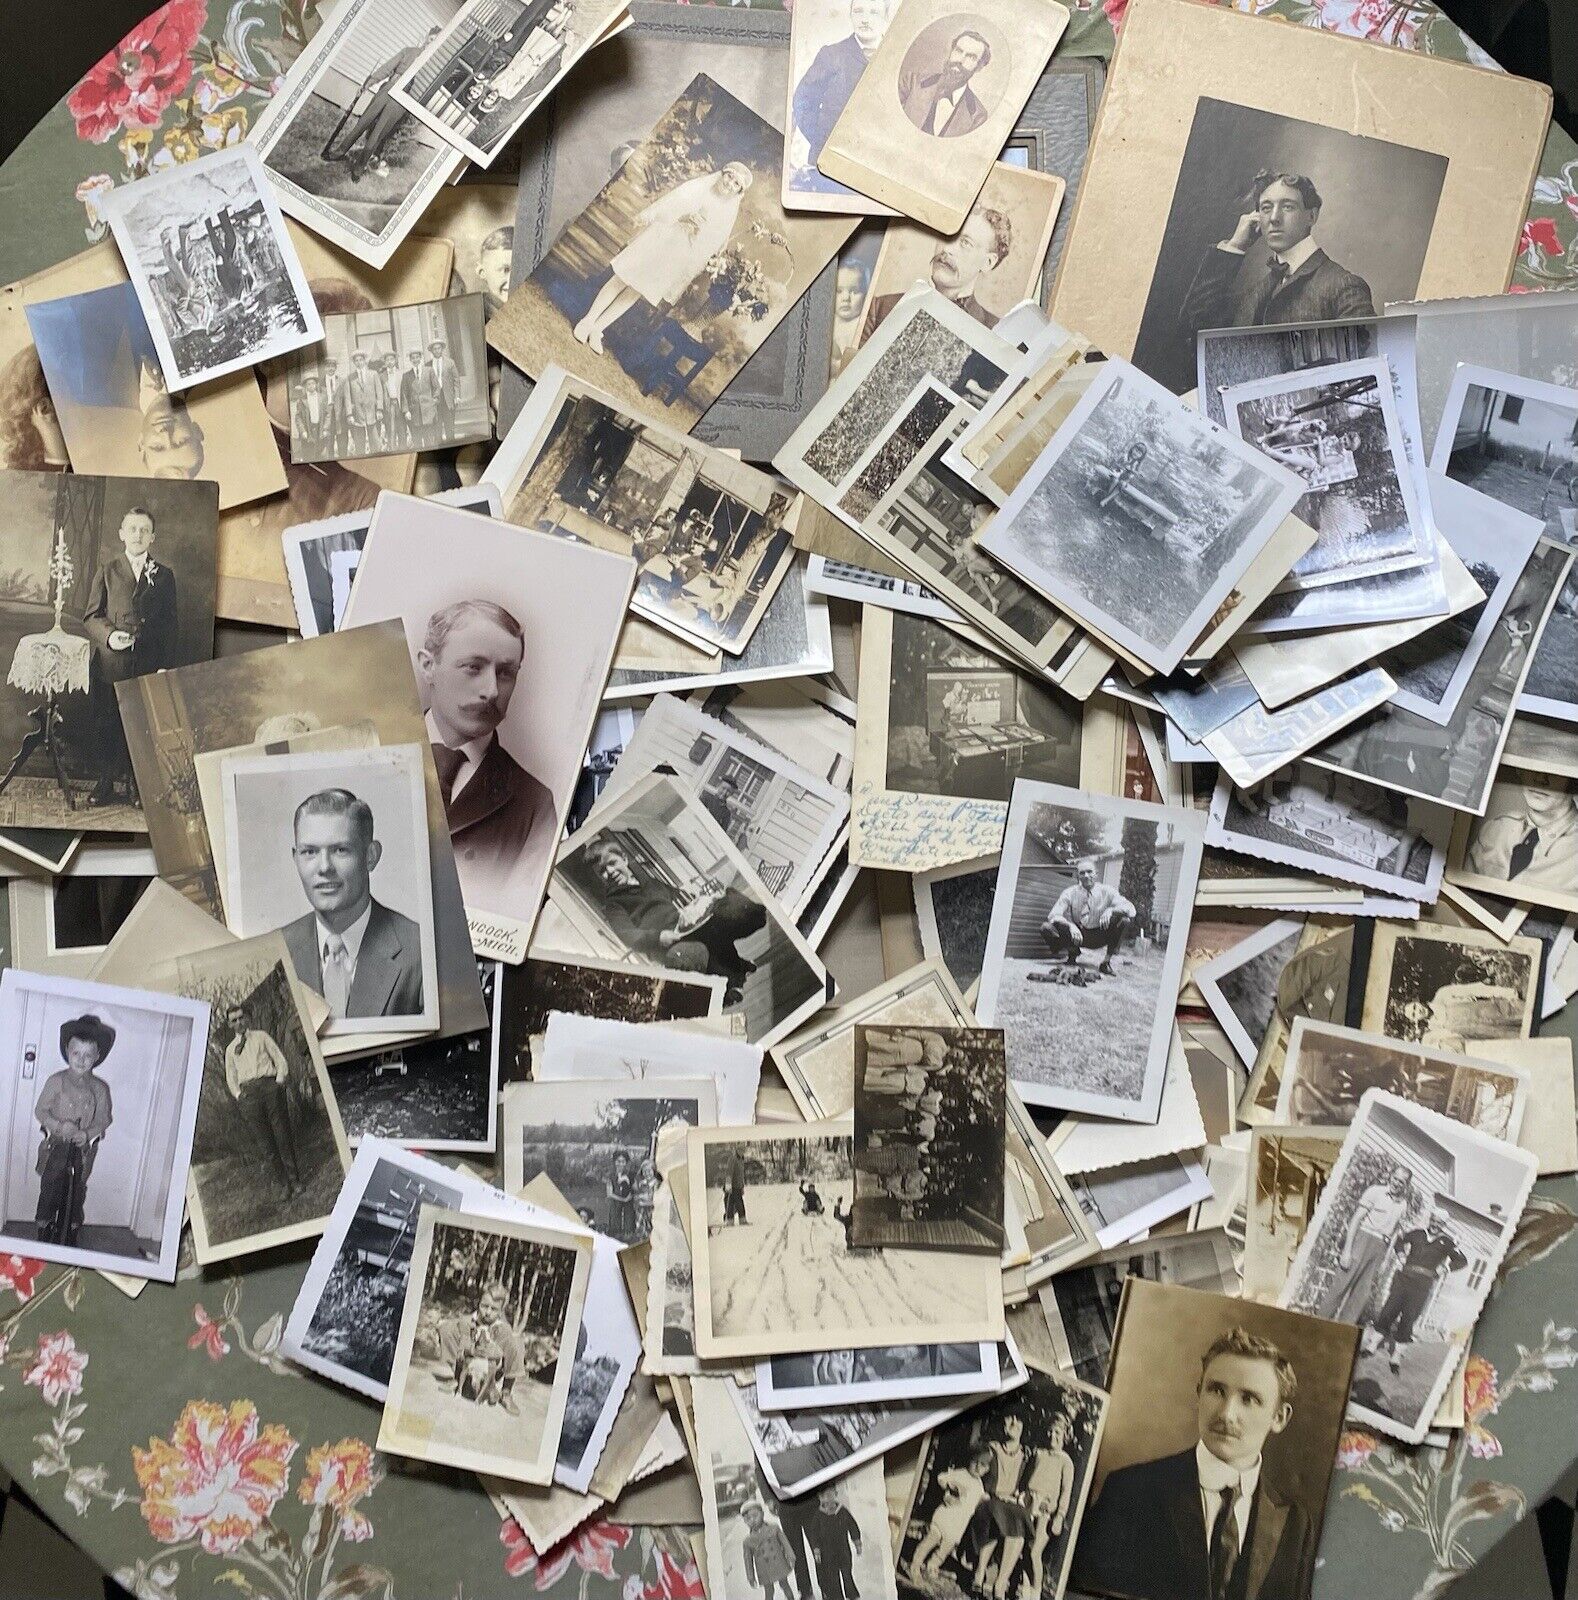 Large Lot 150 Vintage Photos Over Many Decades Family & Farm Life & More